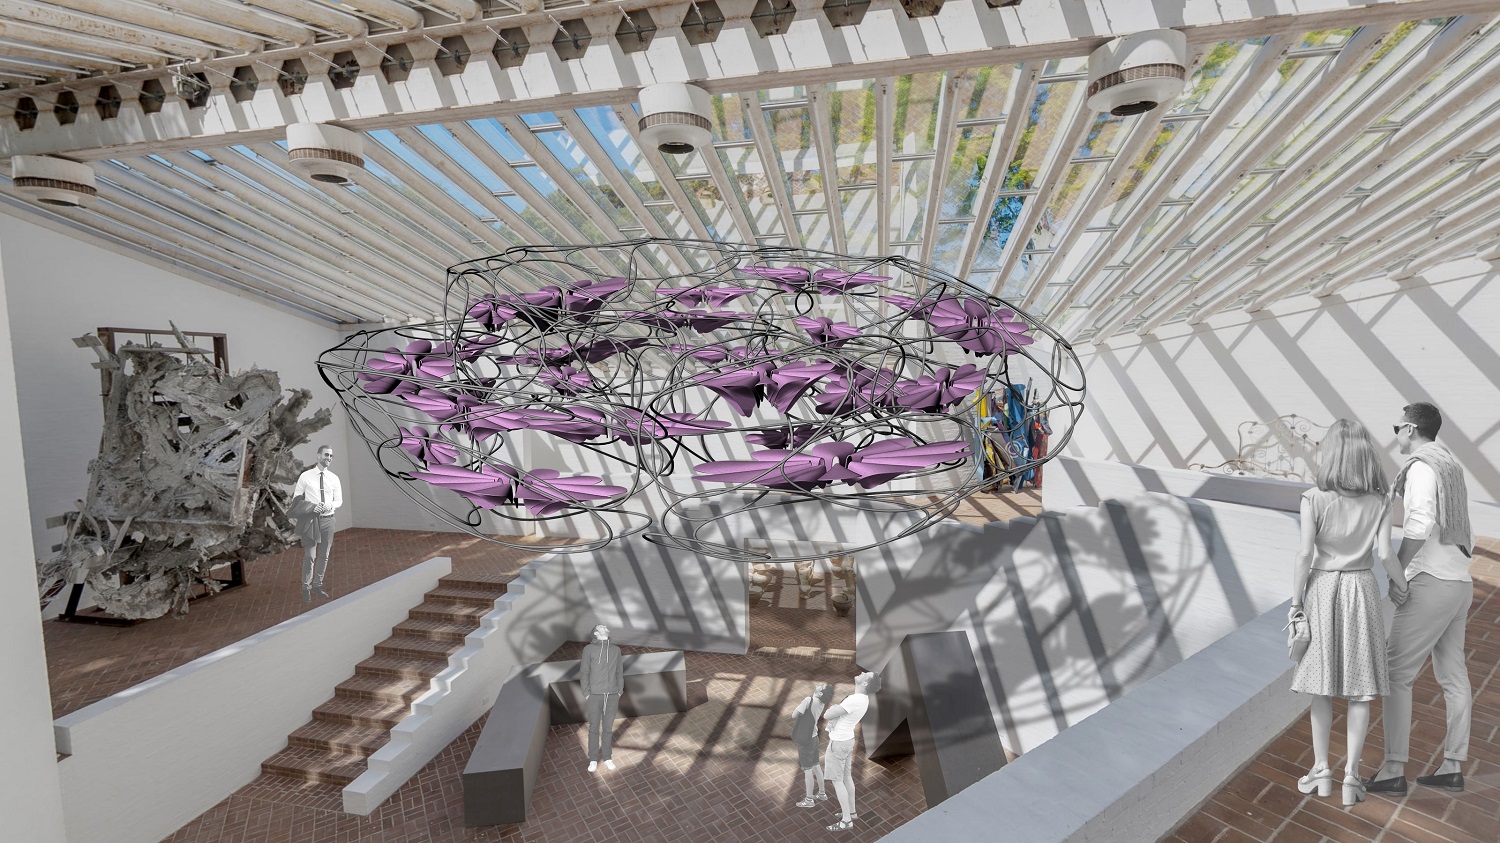 A rendering of the Mycelium 3D sculpture in the Center for Architecture.